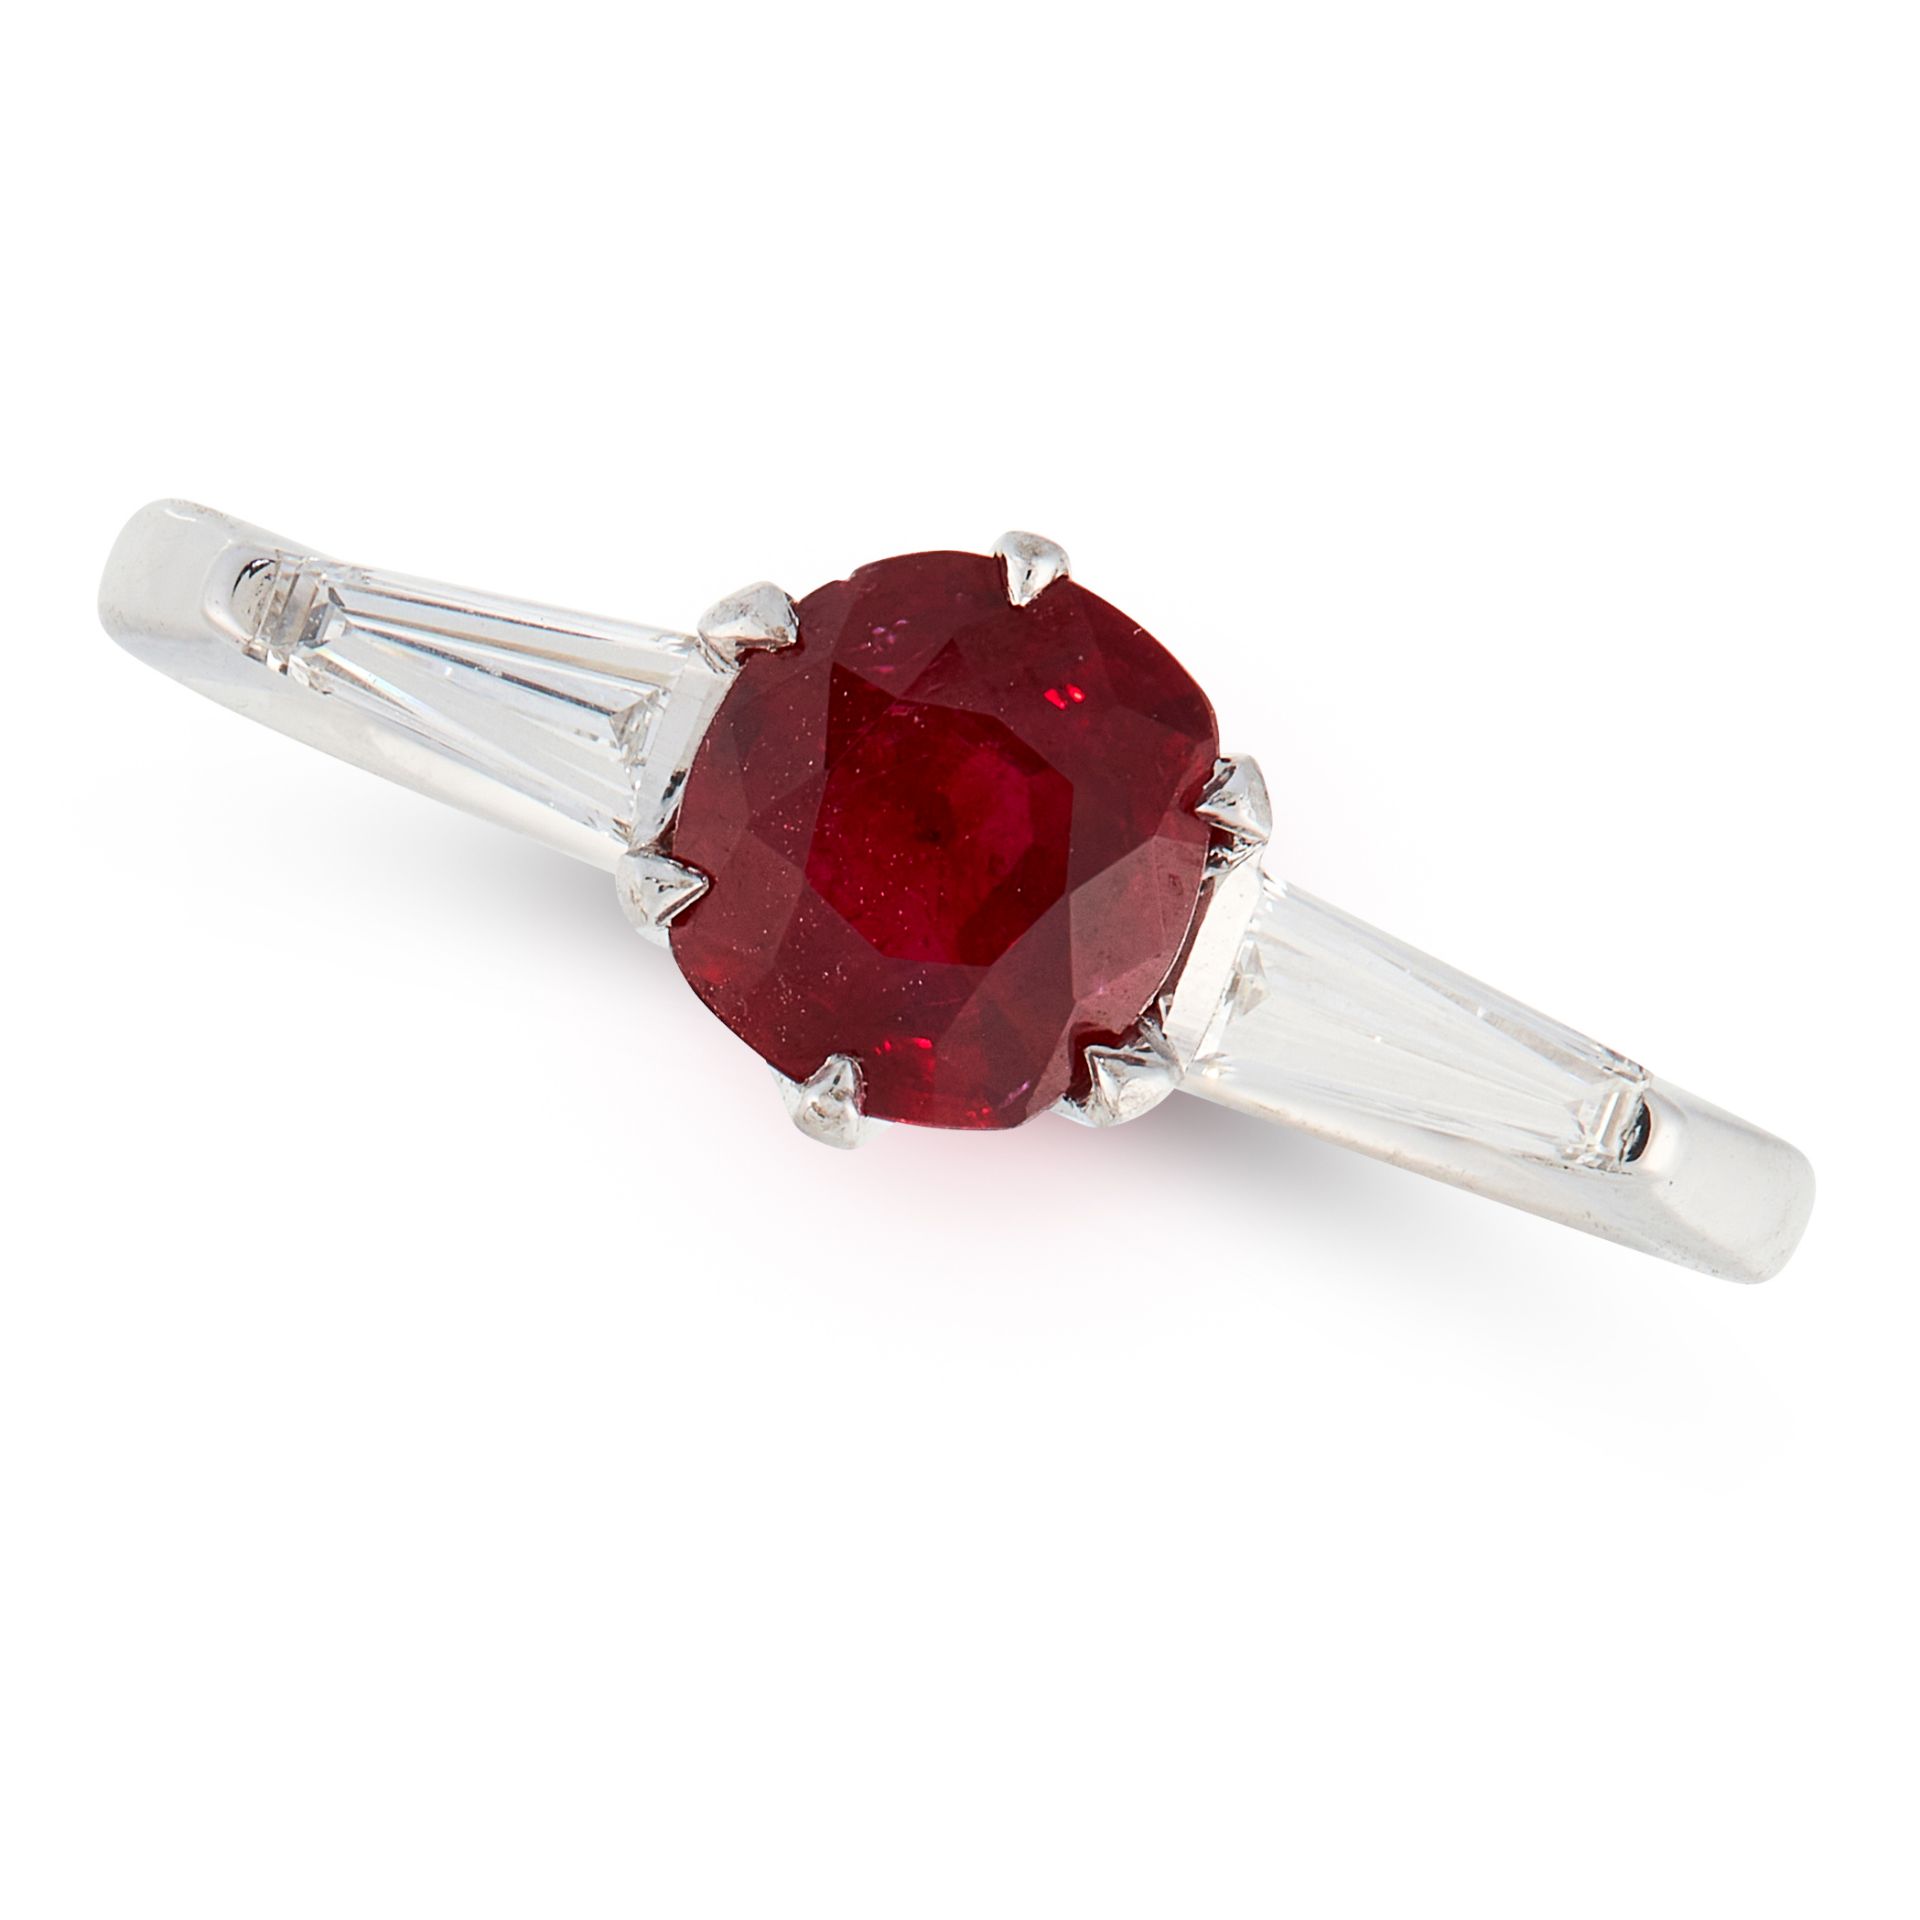 A RUBY AND DIAMOND RING set with a cushion cut ruby of 1.16 carats between two tapered baguette